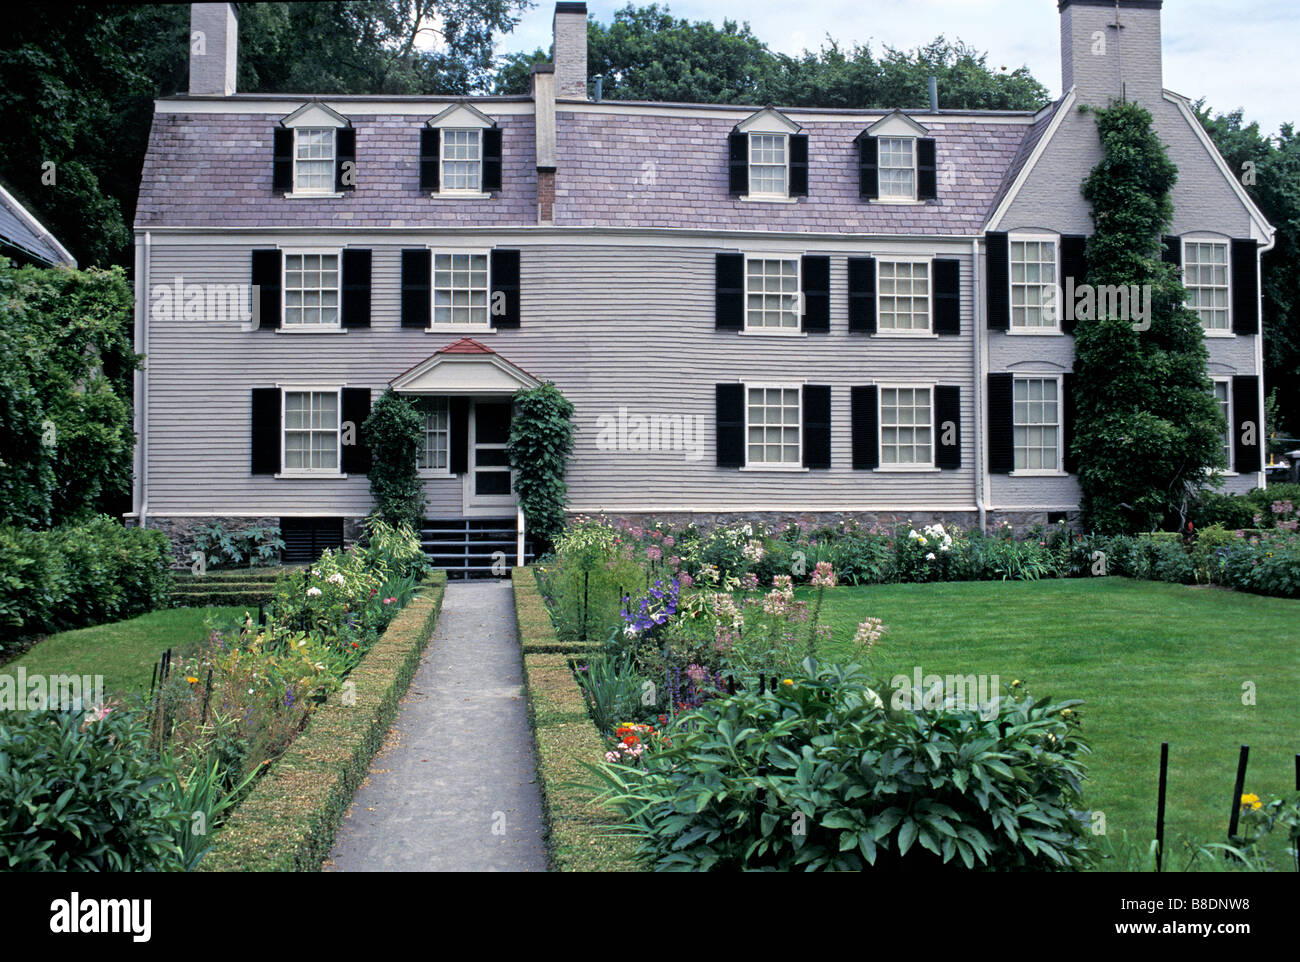 Home of John Adams and his family now a Naional Historical Park Quincy formerly Braintree Massachusetts. Photograph Stock Photo